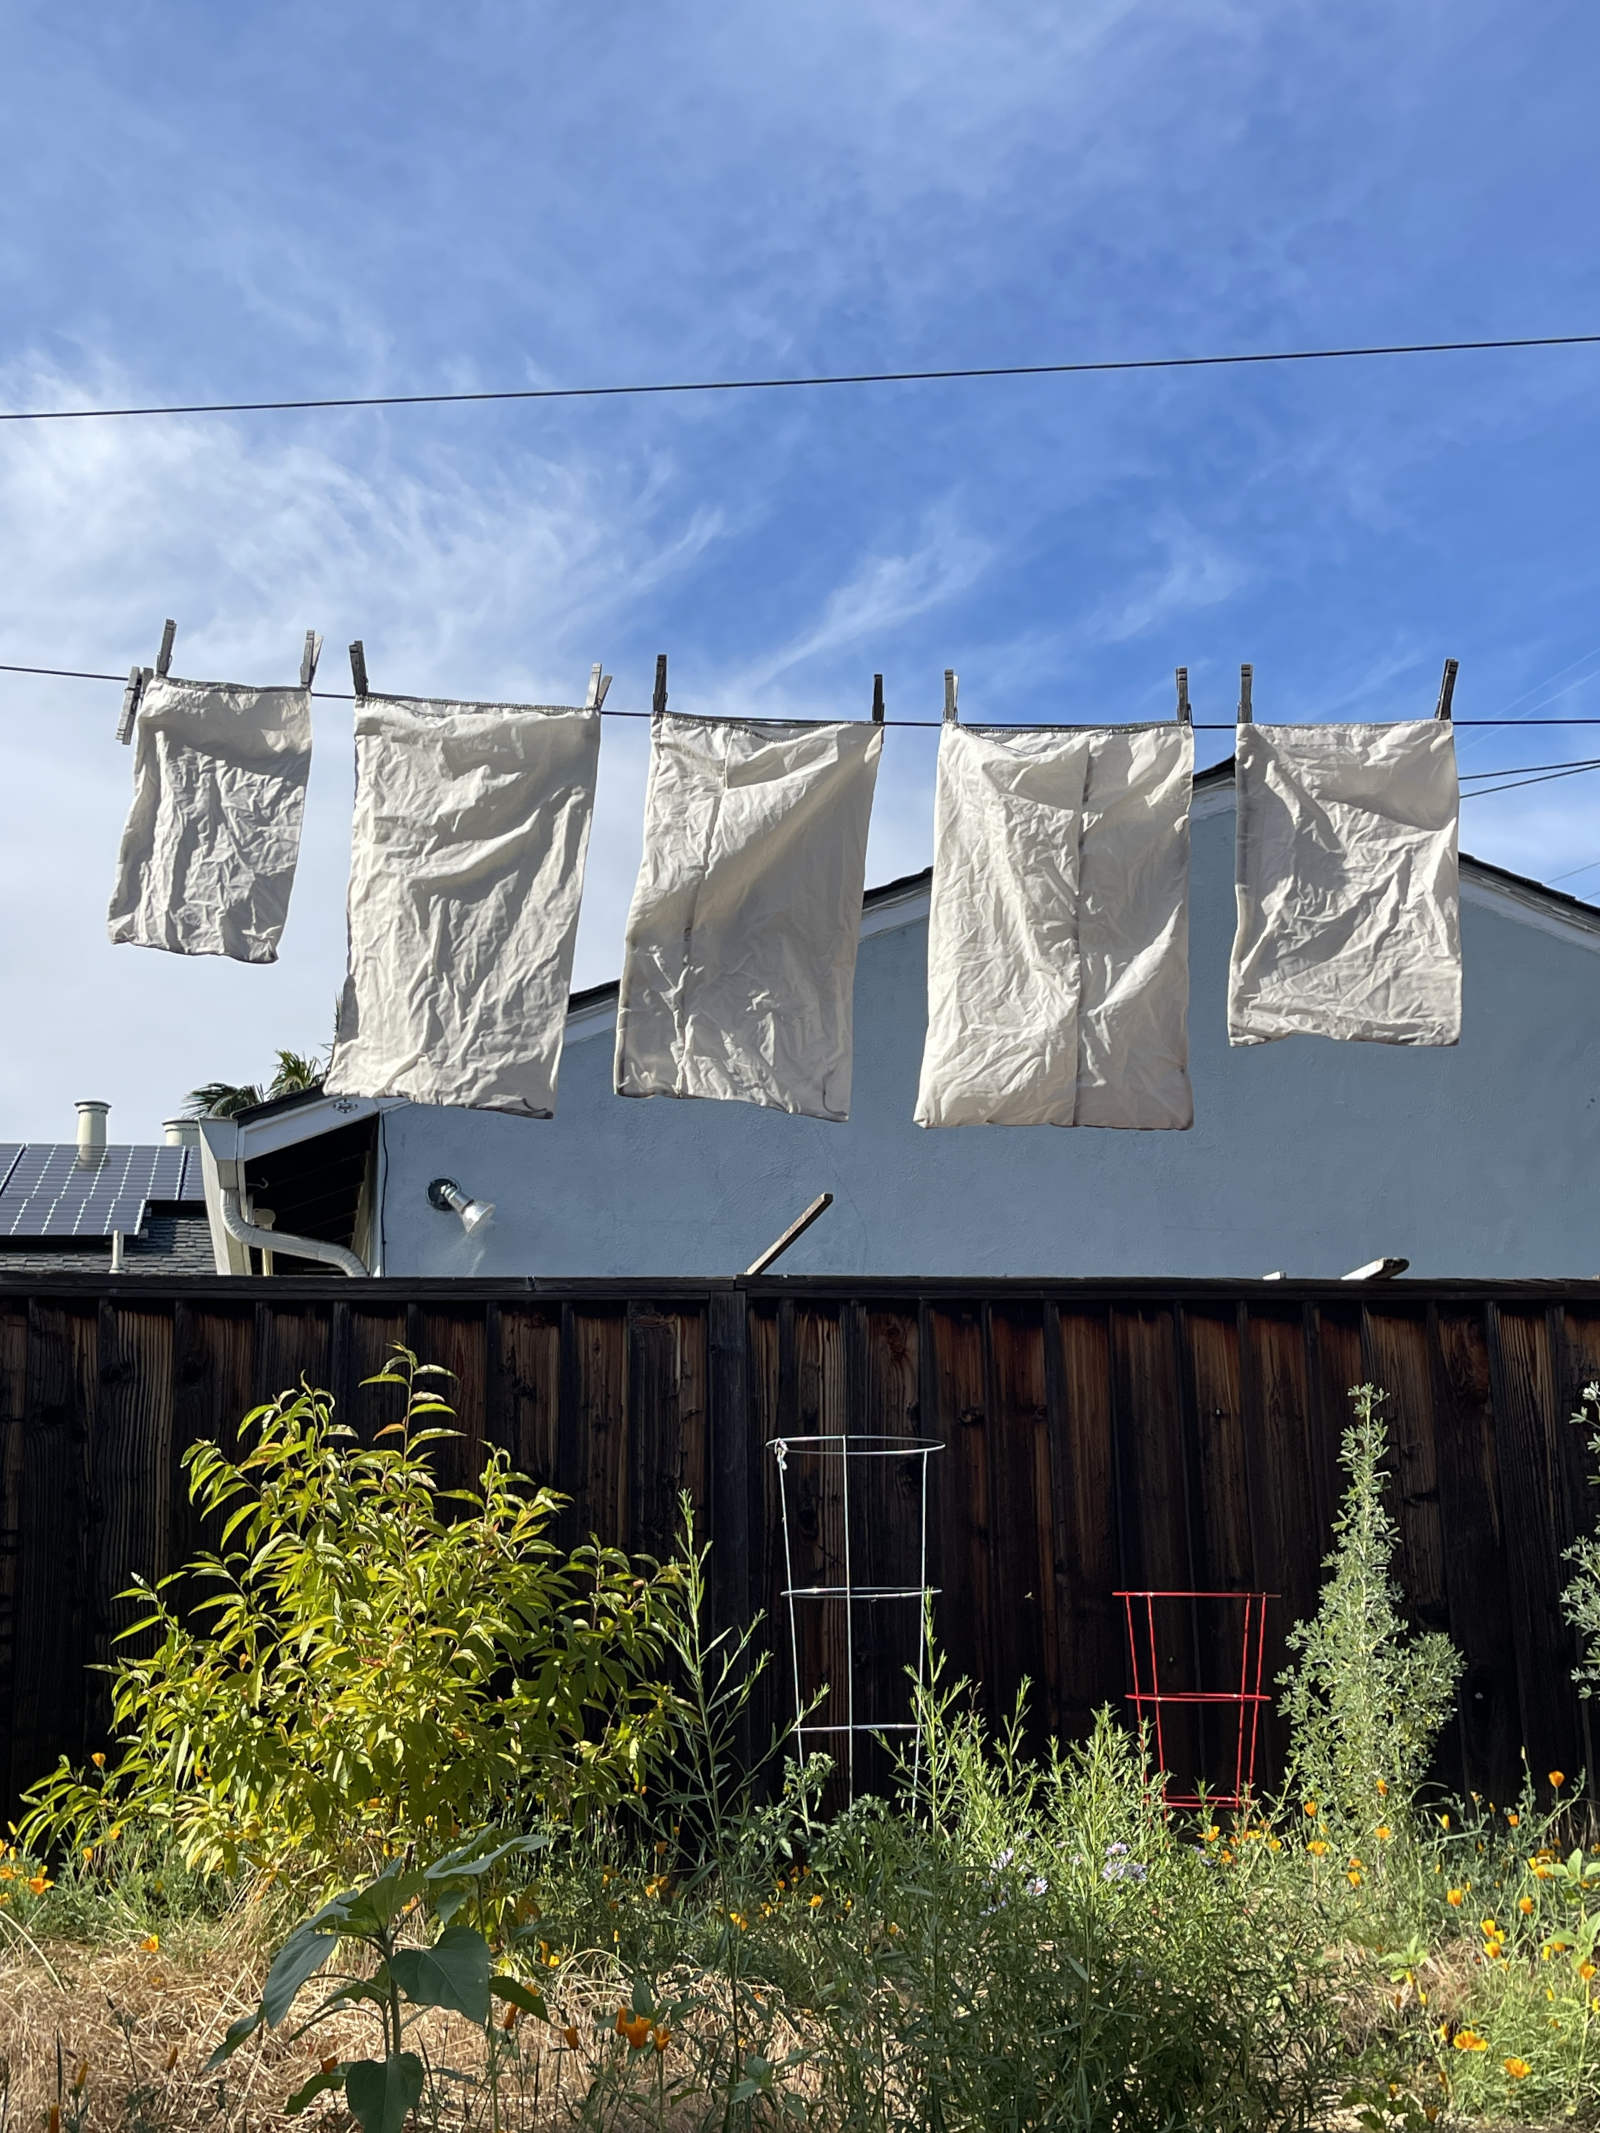 five white cloth produce bags dry on a clothesline outside against a blue sky. Trees and shrubs and flowers grow in the background along a dark wooden fence.